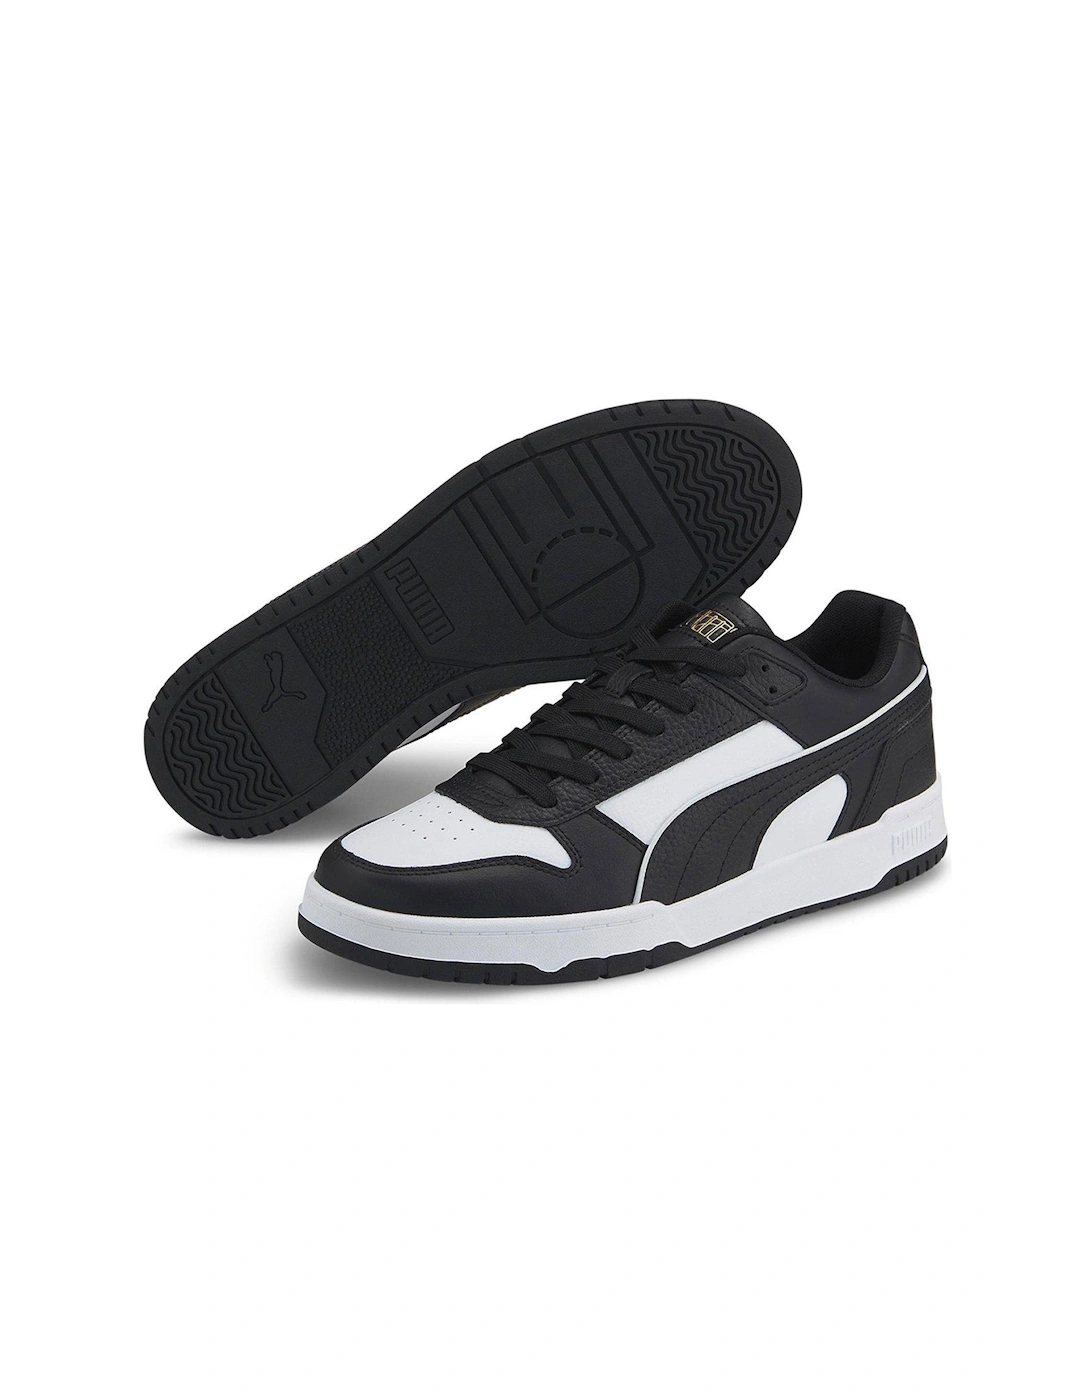 Womens Rebound Game Low Trainers - White/Black